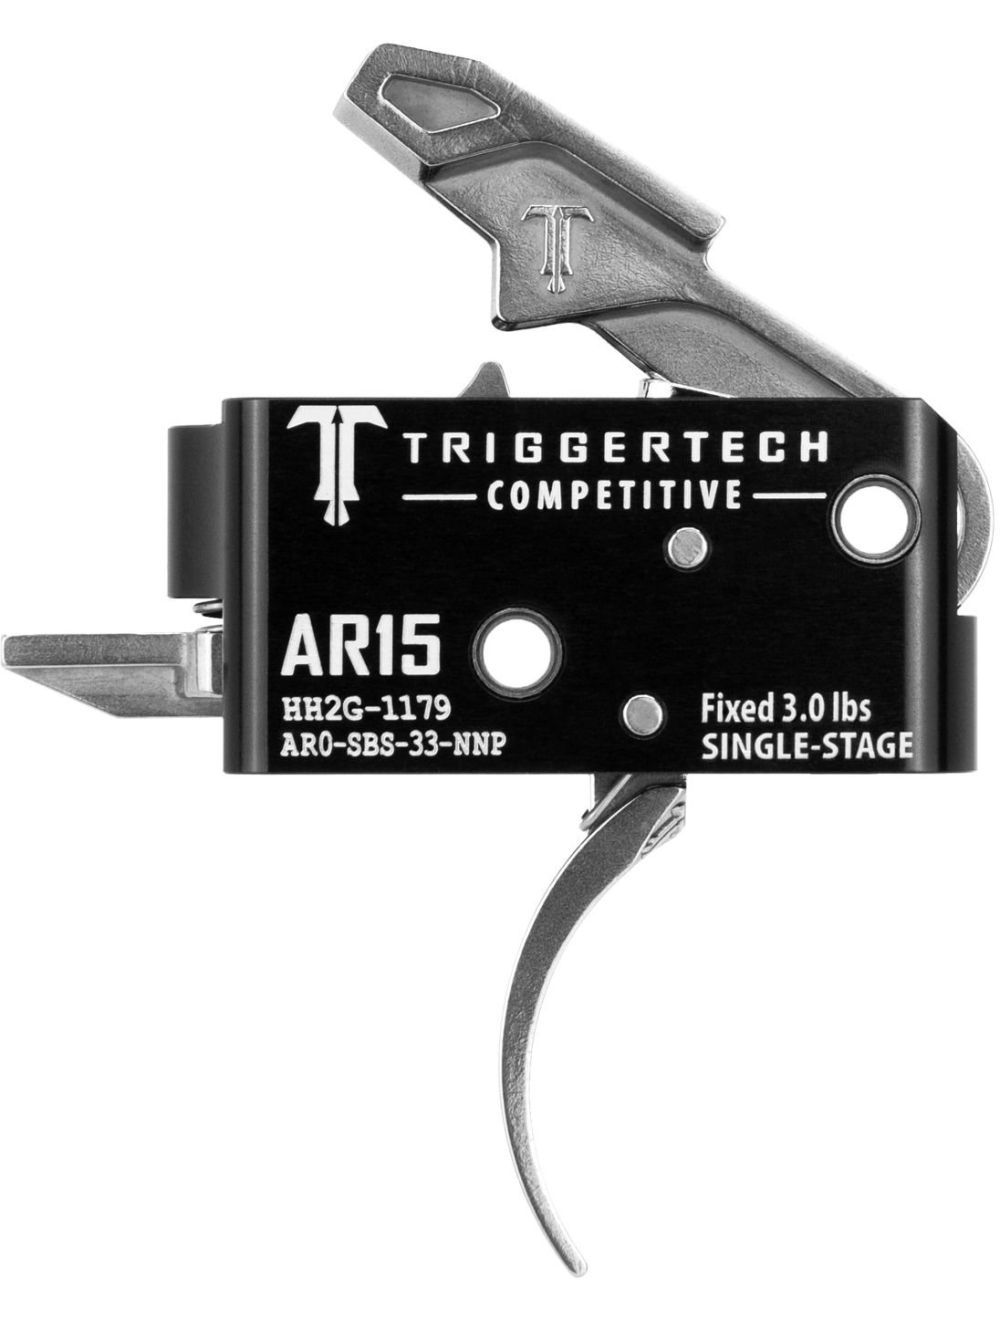 AR15 Single-Stage Competitive Trigger